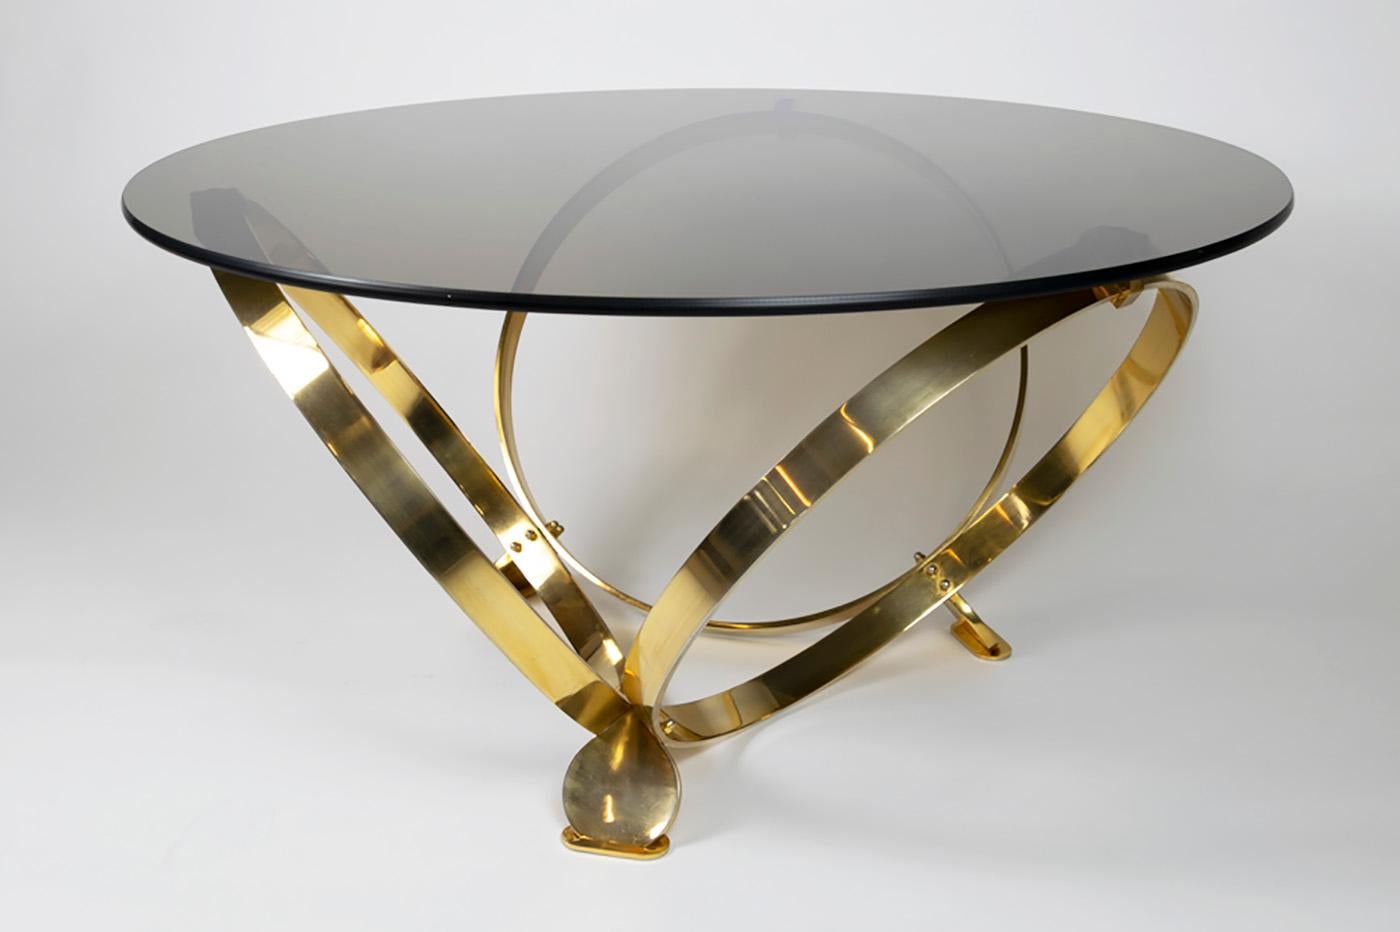 Ronald Schmitt coffee table in brass by Knut Hesterberg completed with a smoked glass top.
Very nice vintage condition.